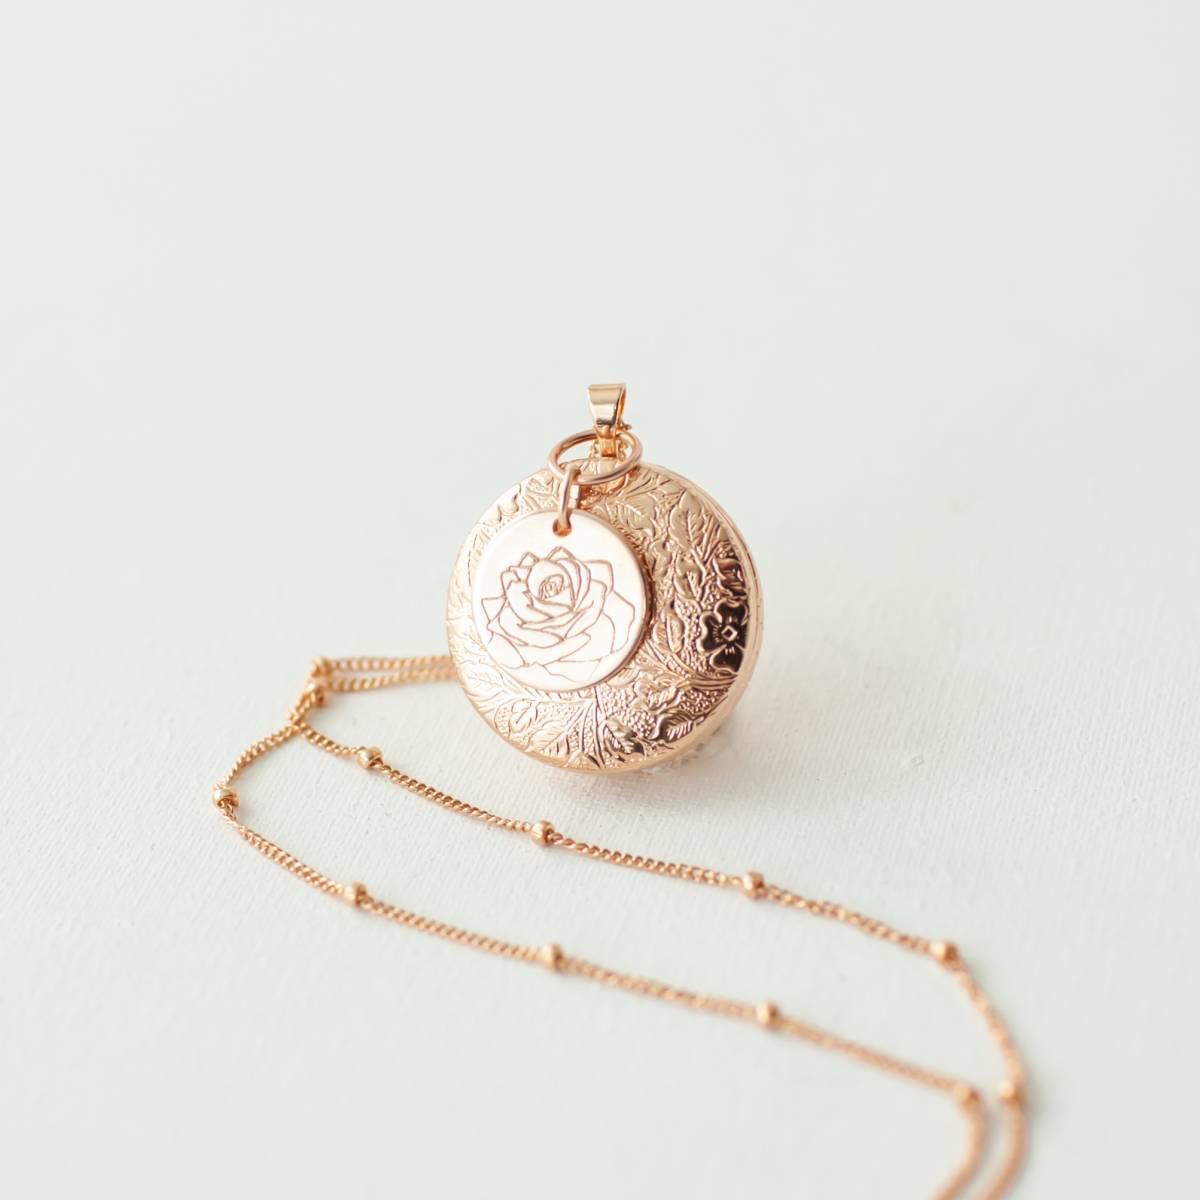 Birth Month Flower Locket in Gold, Antique Silver and Rose Gold on Satellite Chain Silver 0 Photos